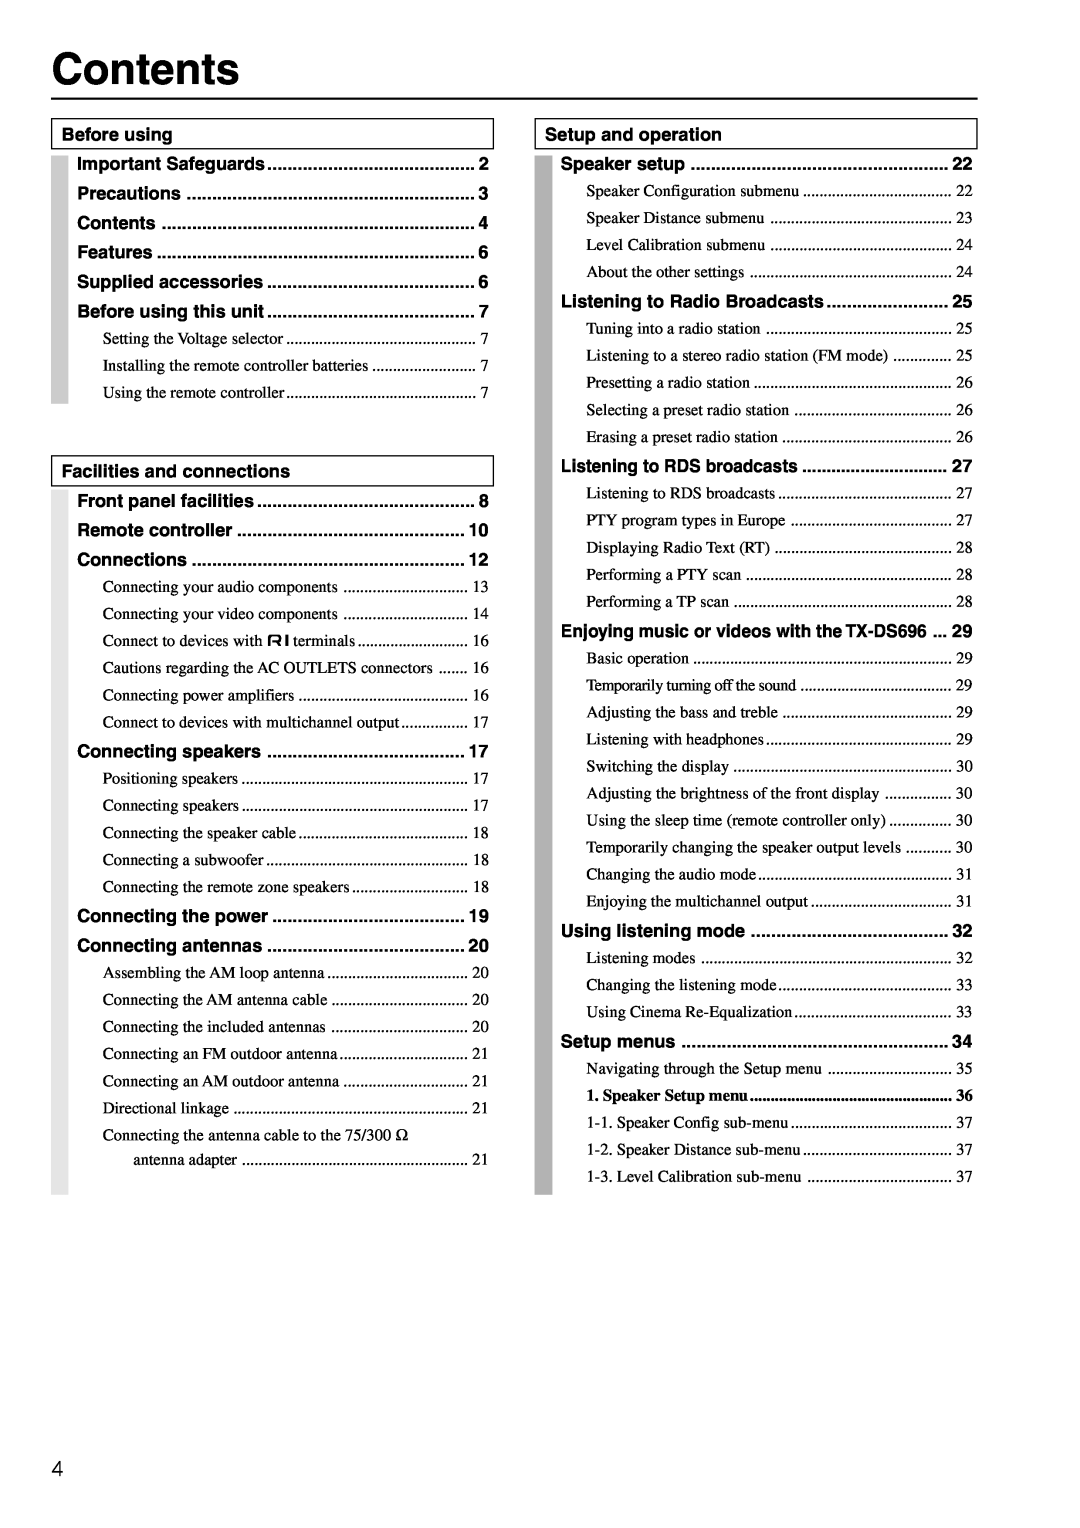 Onkyo TX-DS696 appendix Contents, Before using, Facilities and connections, Setup and operation 